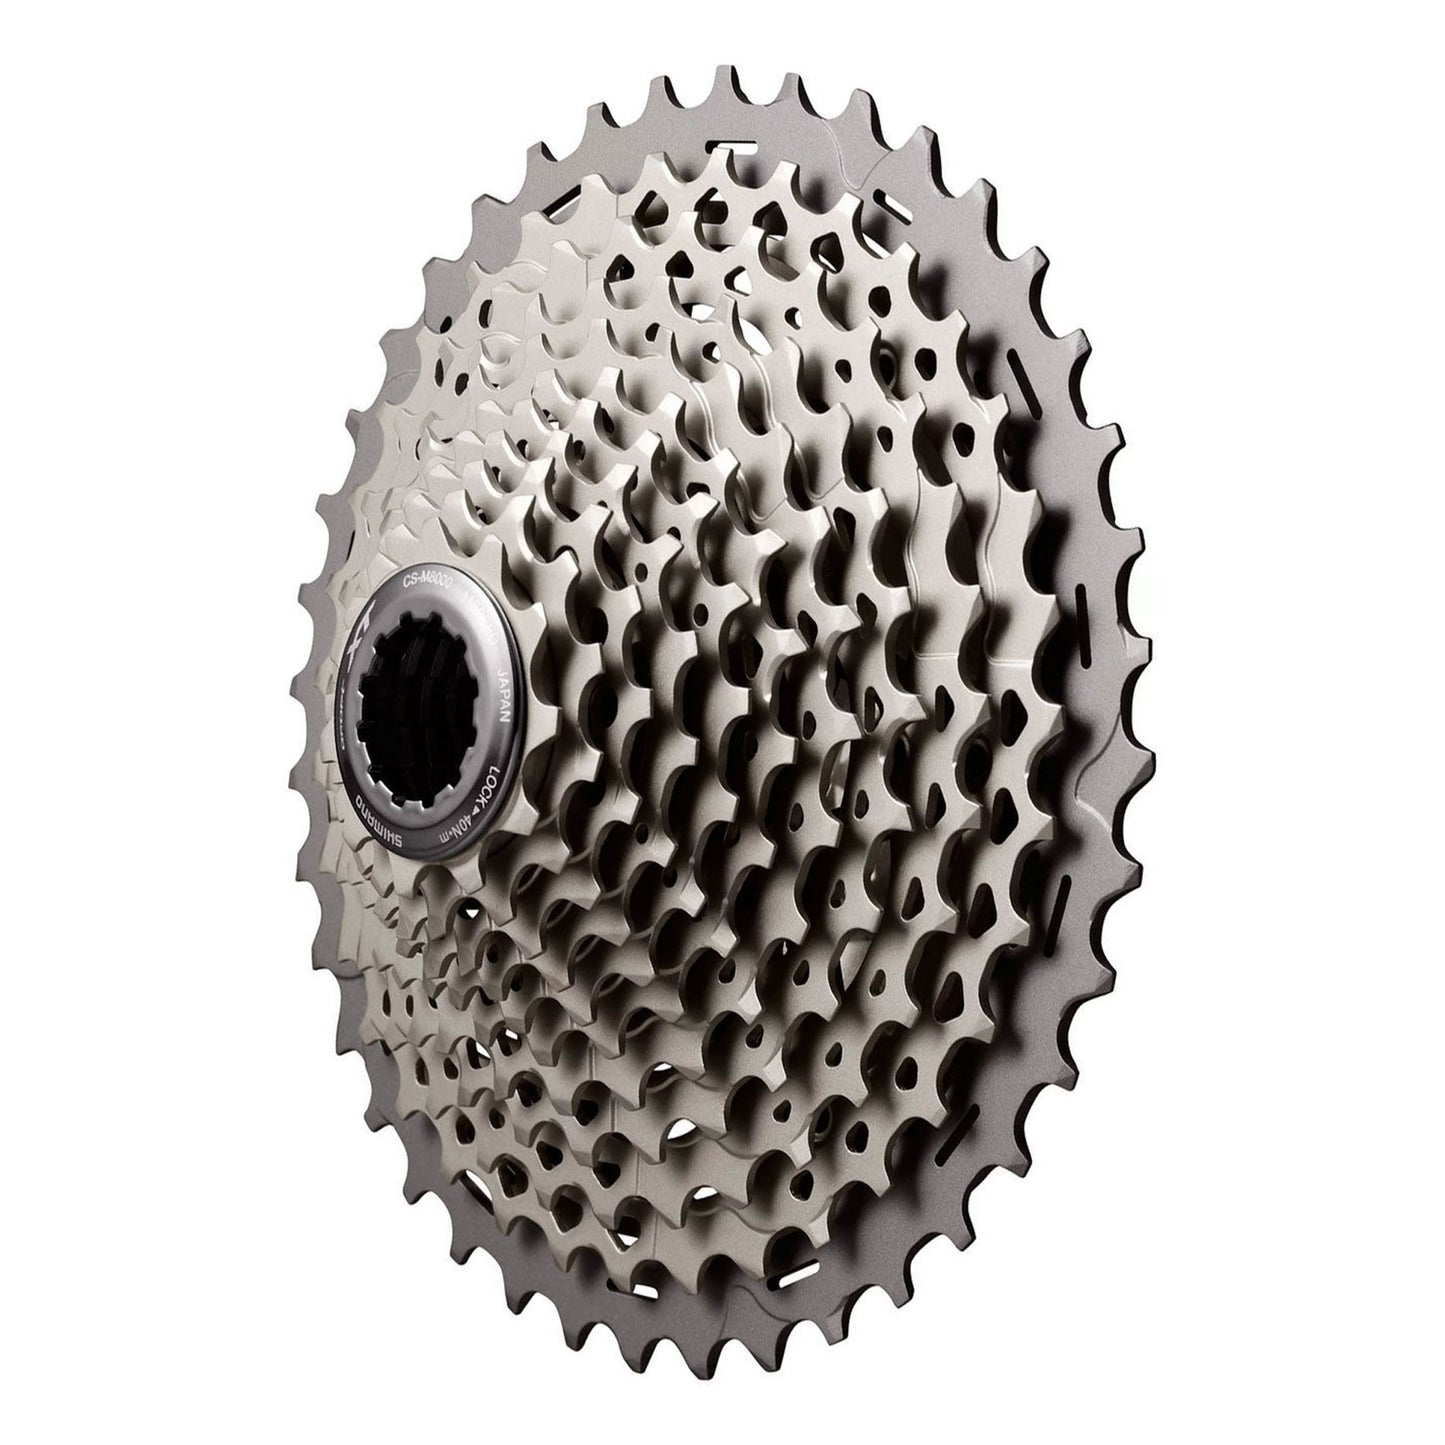 Shimano XT M8000 11 Speed Cassette 11-46 Tooth buy online at Woolys Wheels with free delivery!